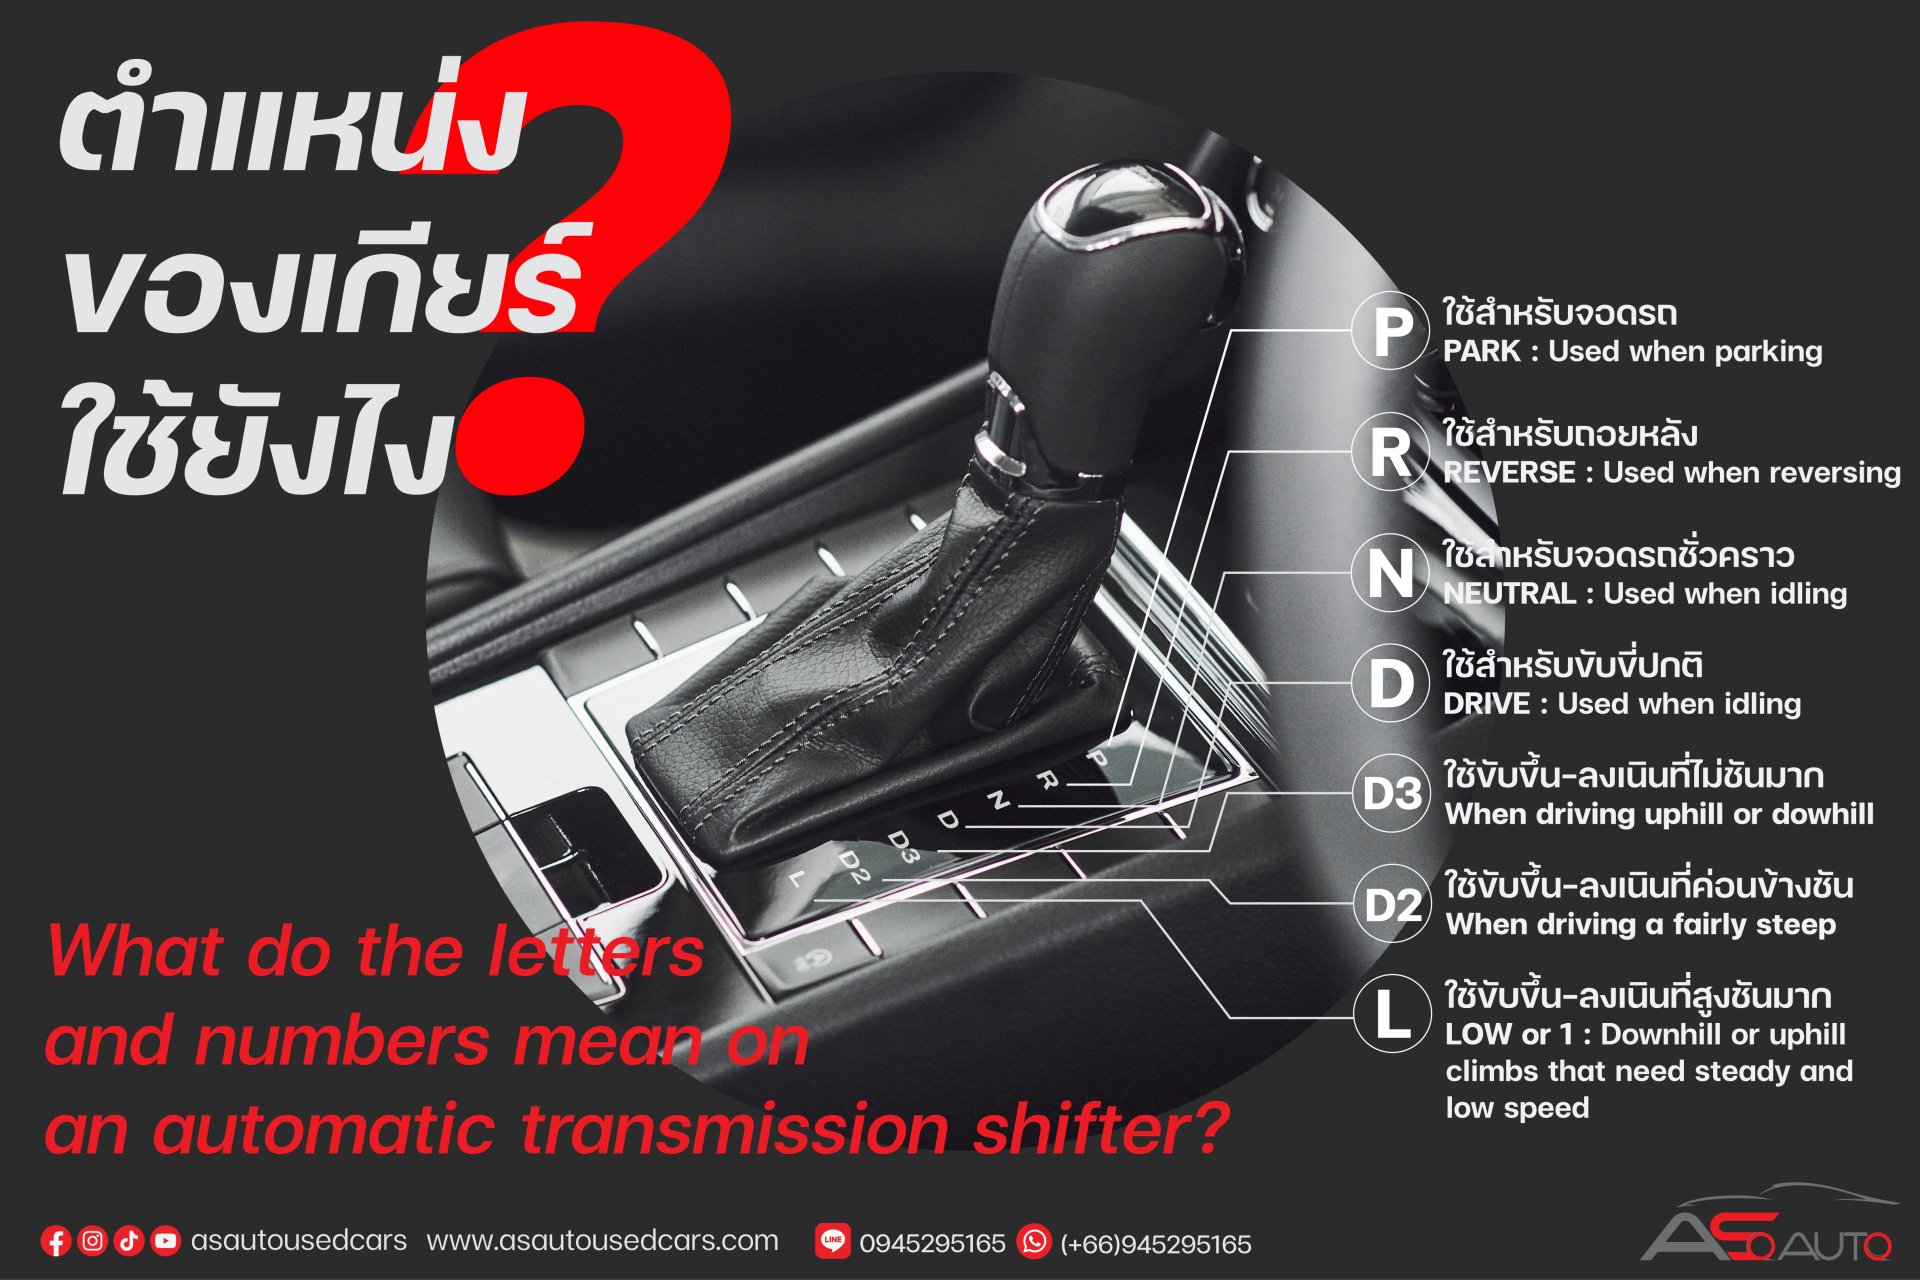 What Do The Numbers and Letters Mean on an Automatic Transmission